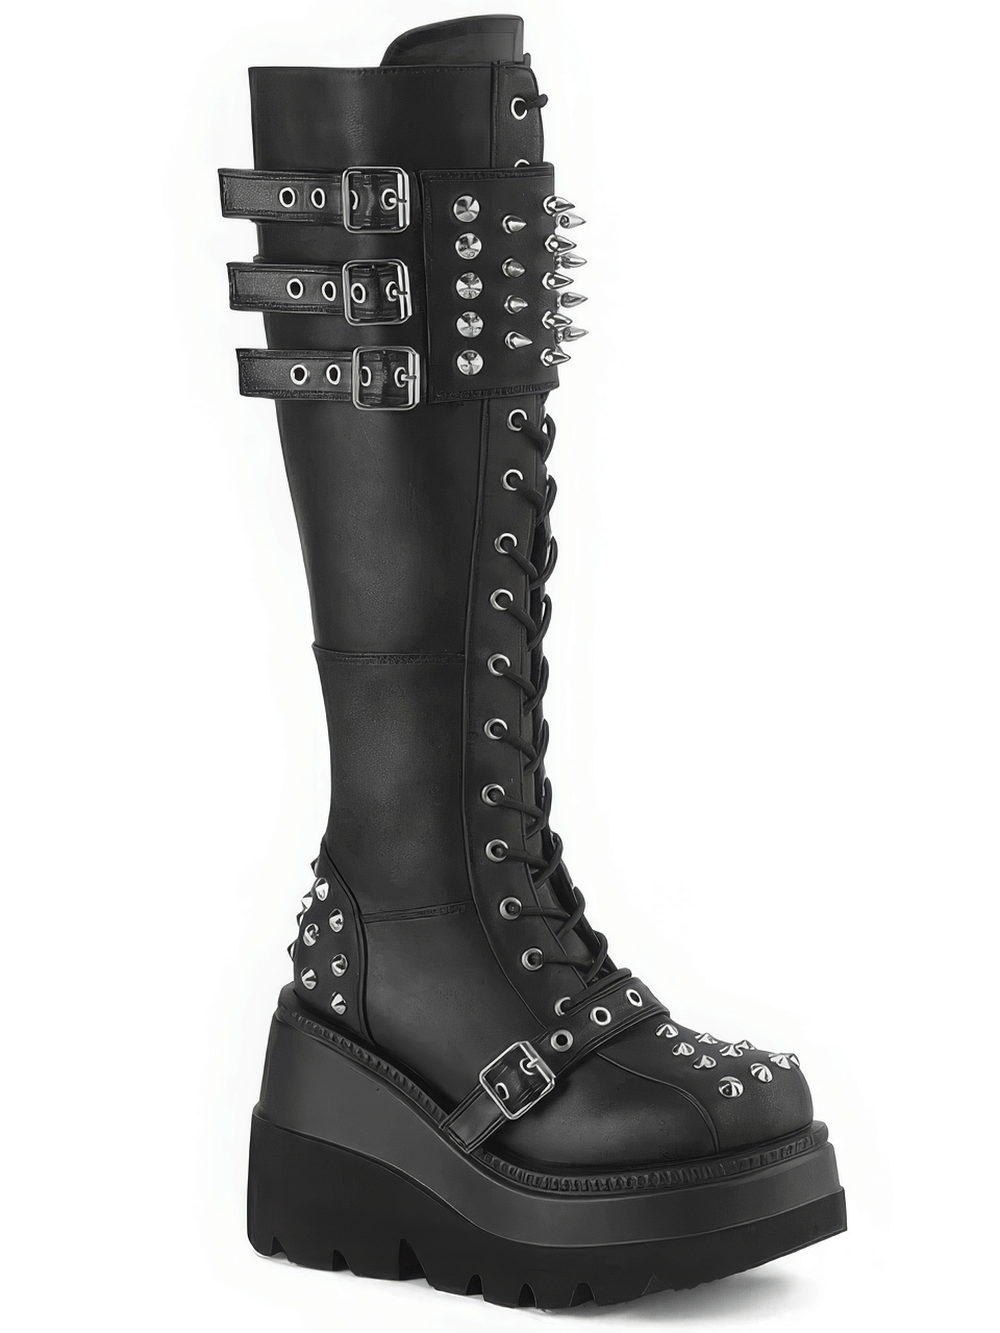 DEMONIA Black Knee-High Lace-Up Boots with Spiked Shield